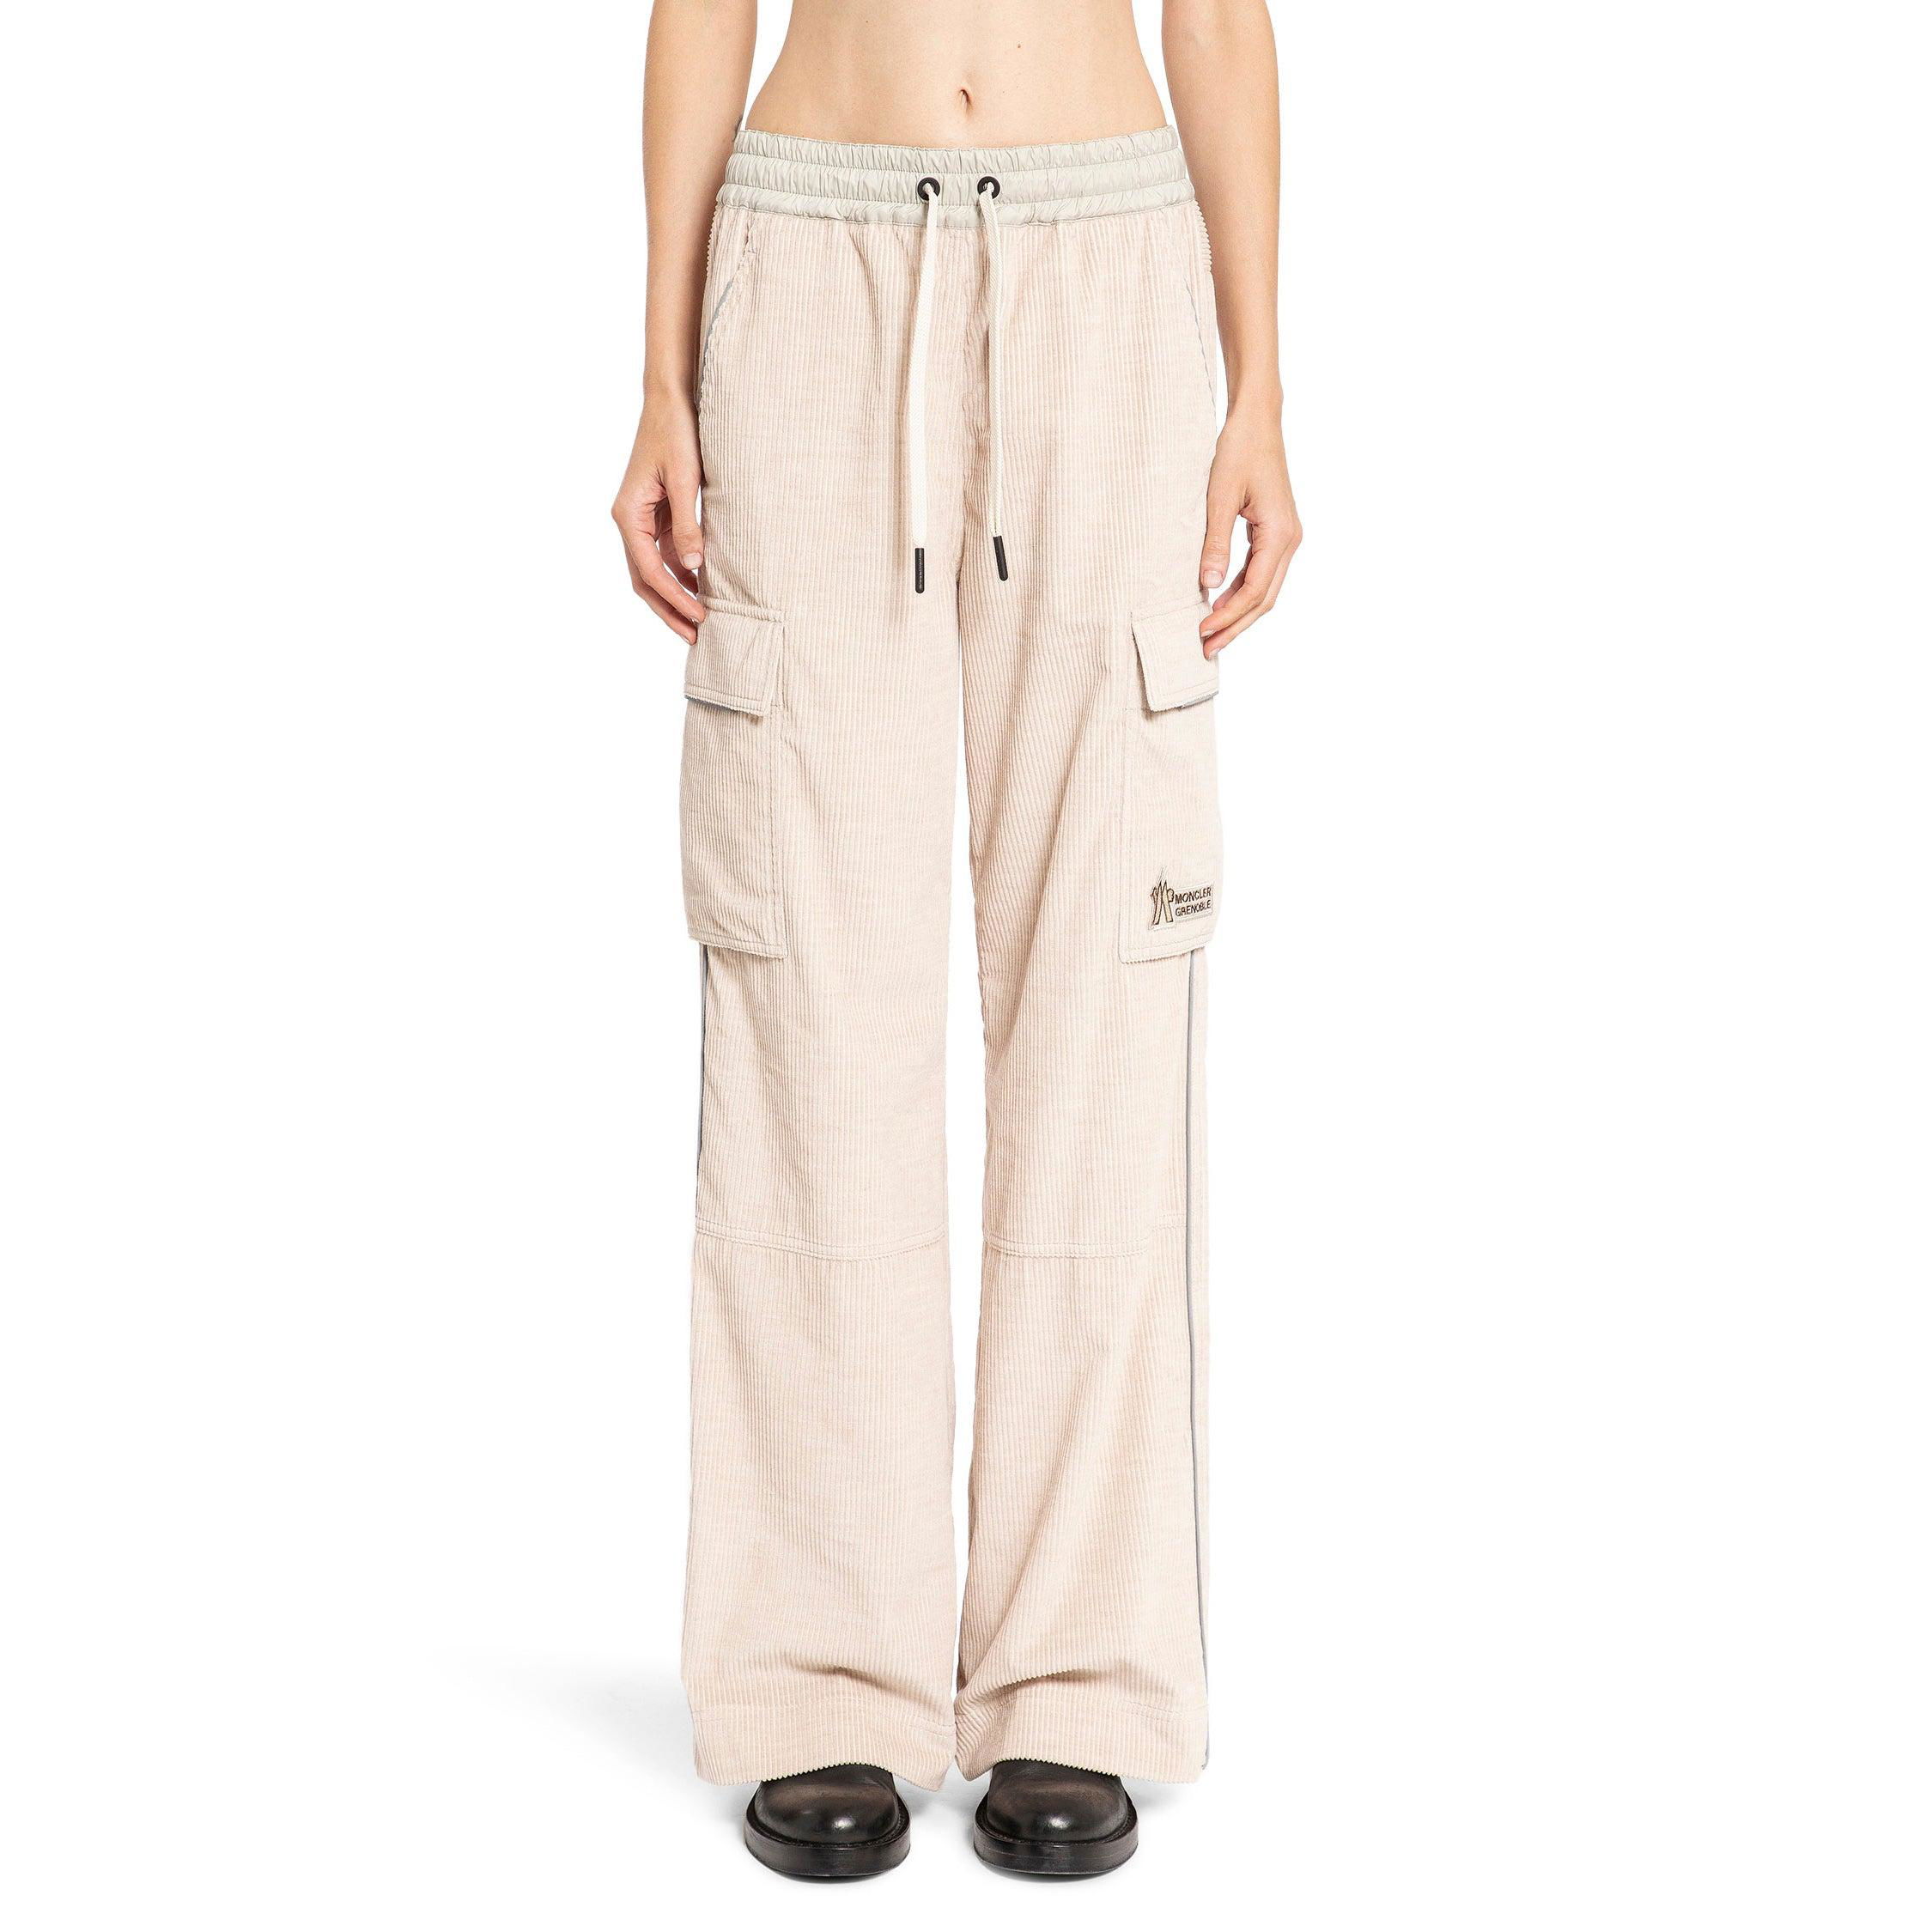 MONCLER GRENOBLE WOMAN BEIGE TROUSERS by MONCLER